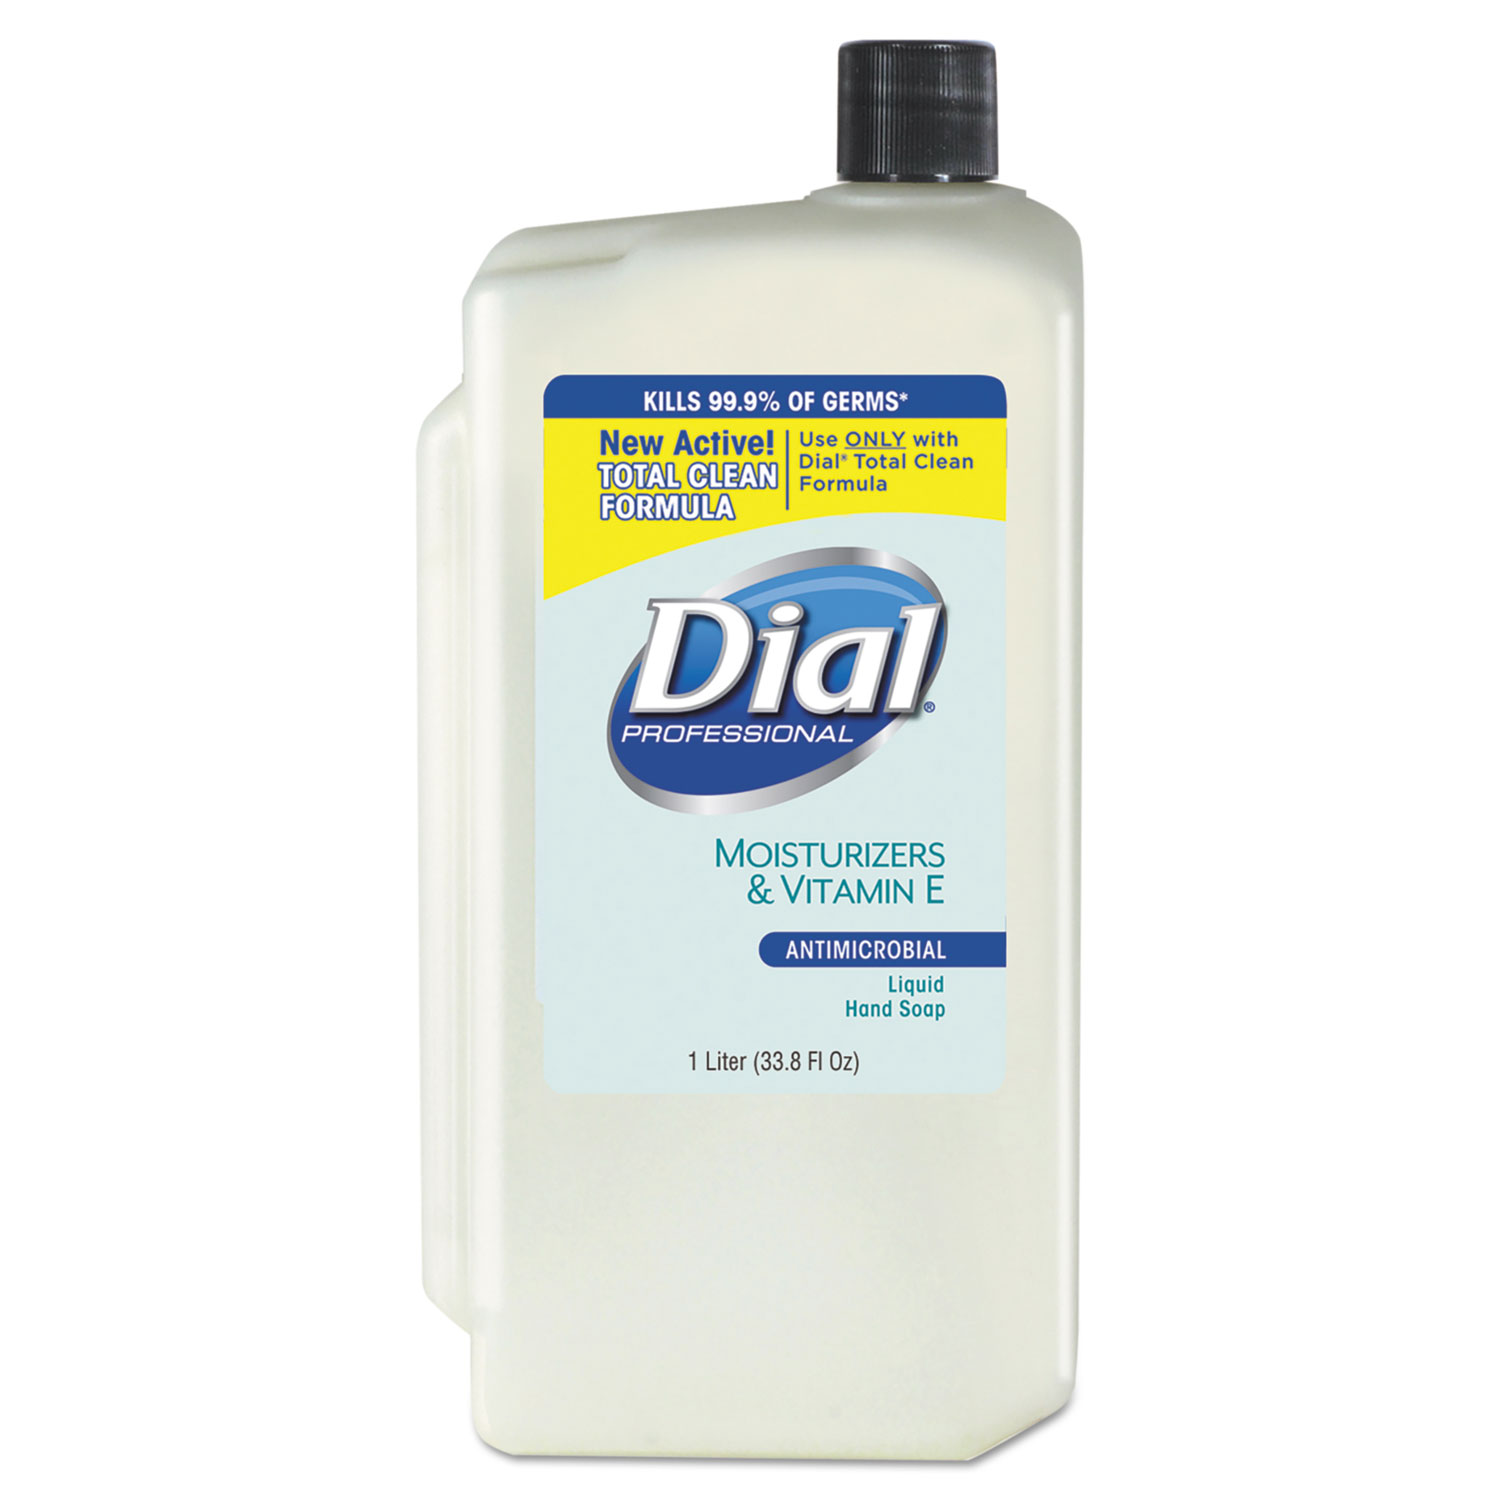  Dial Professional DIA 84029 Antimicrobial Soap with Moisturizers, 1-Liter Refill, 8/Carton (DIA84029) 